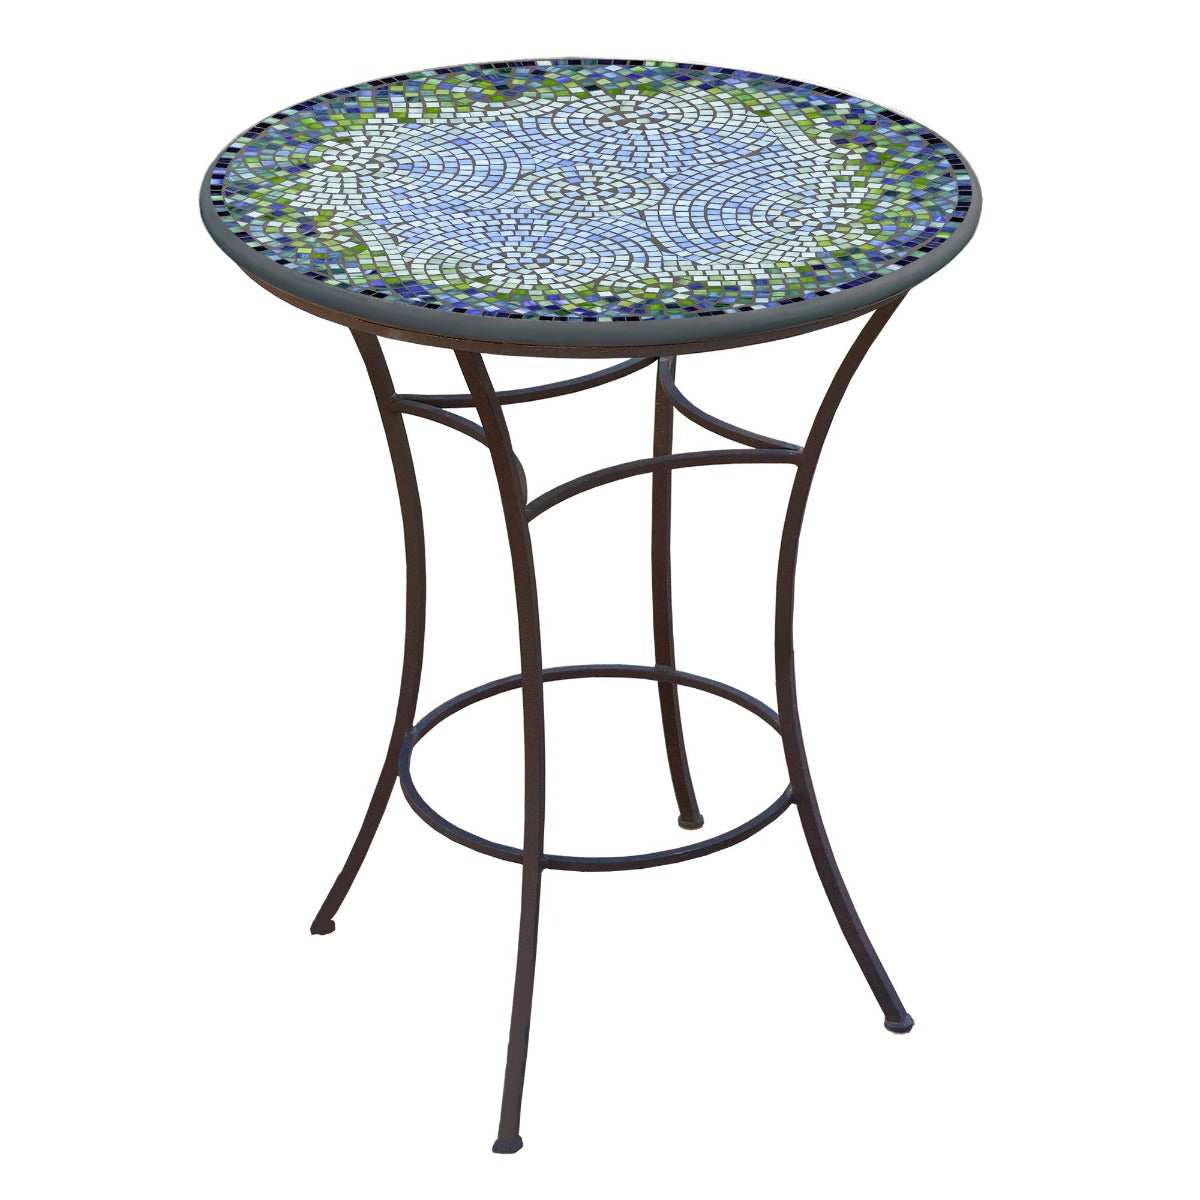 Belize Mosaic High Dining Table-Iron Accents